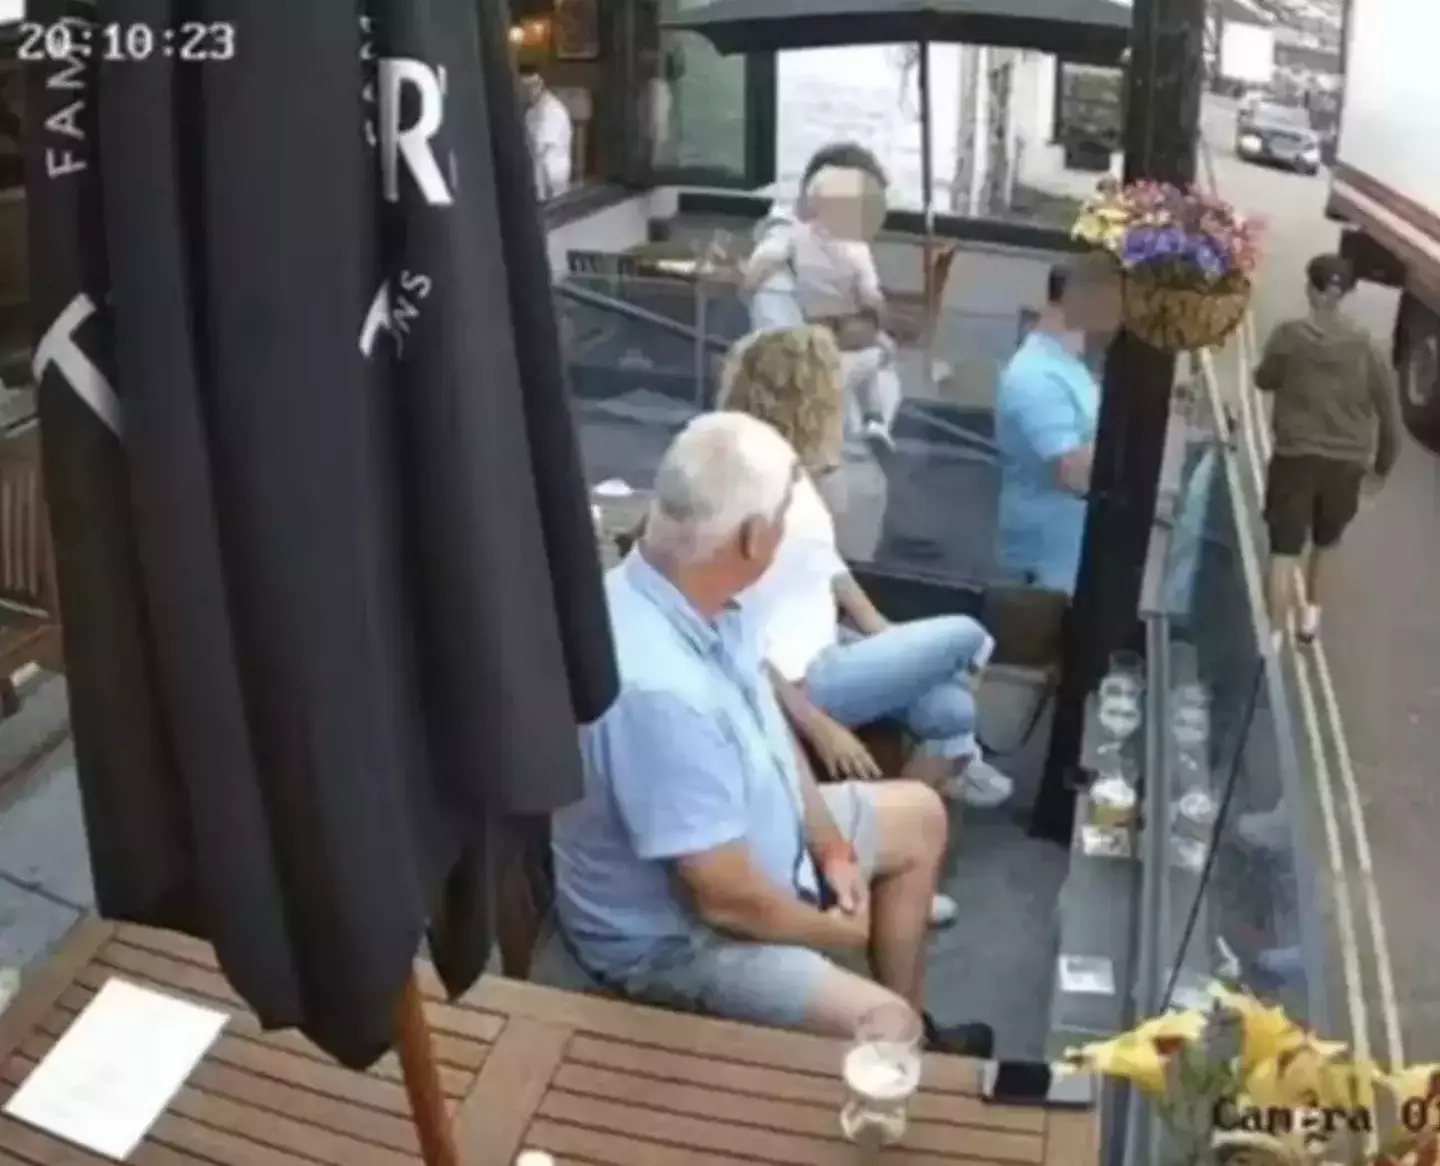 The restaurant released CCTV footage in a bid to catch the family.